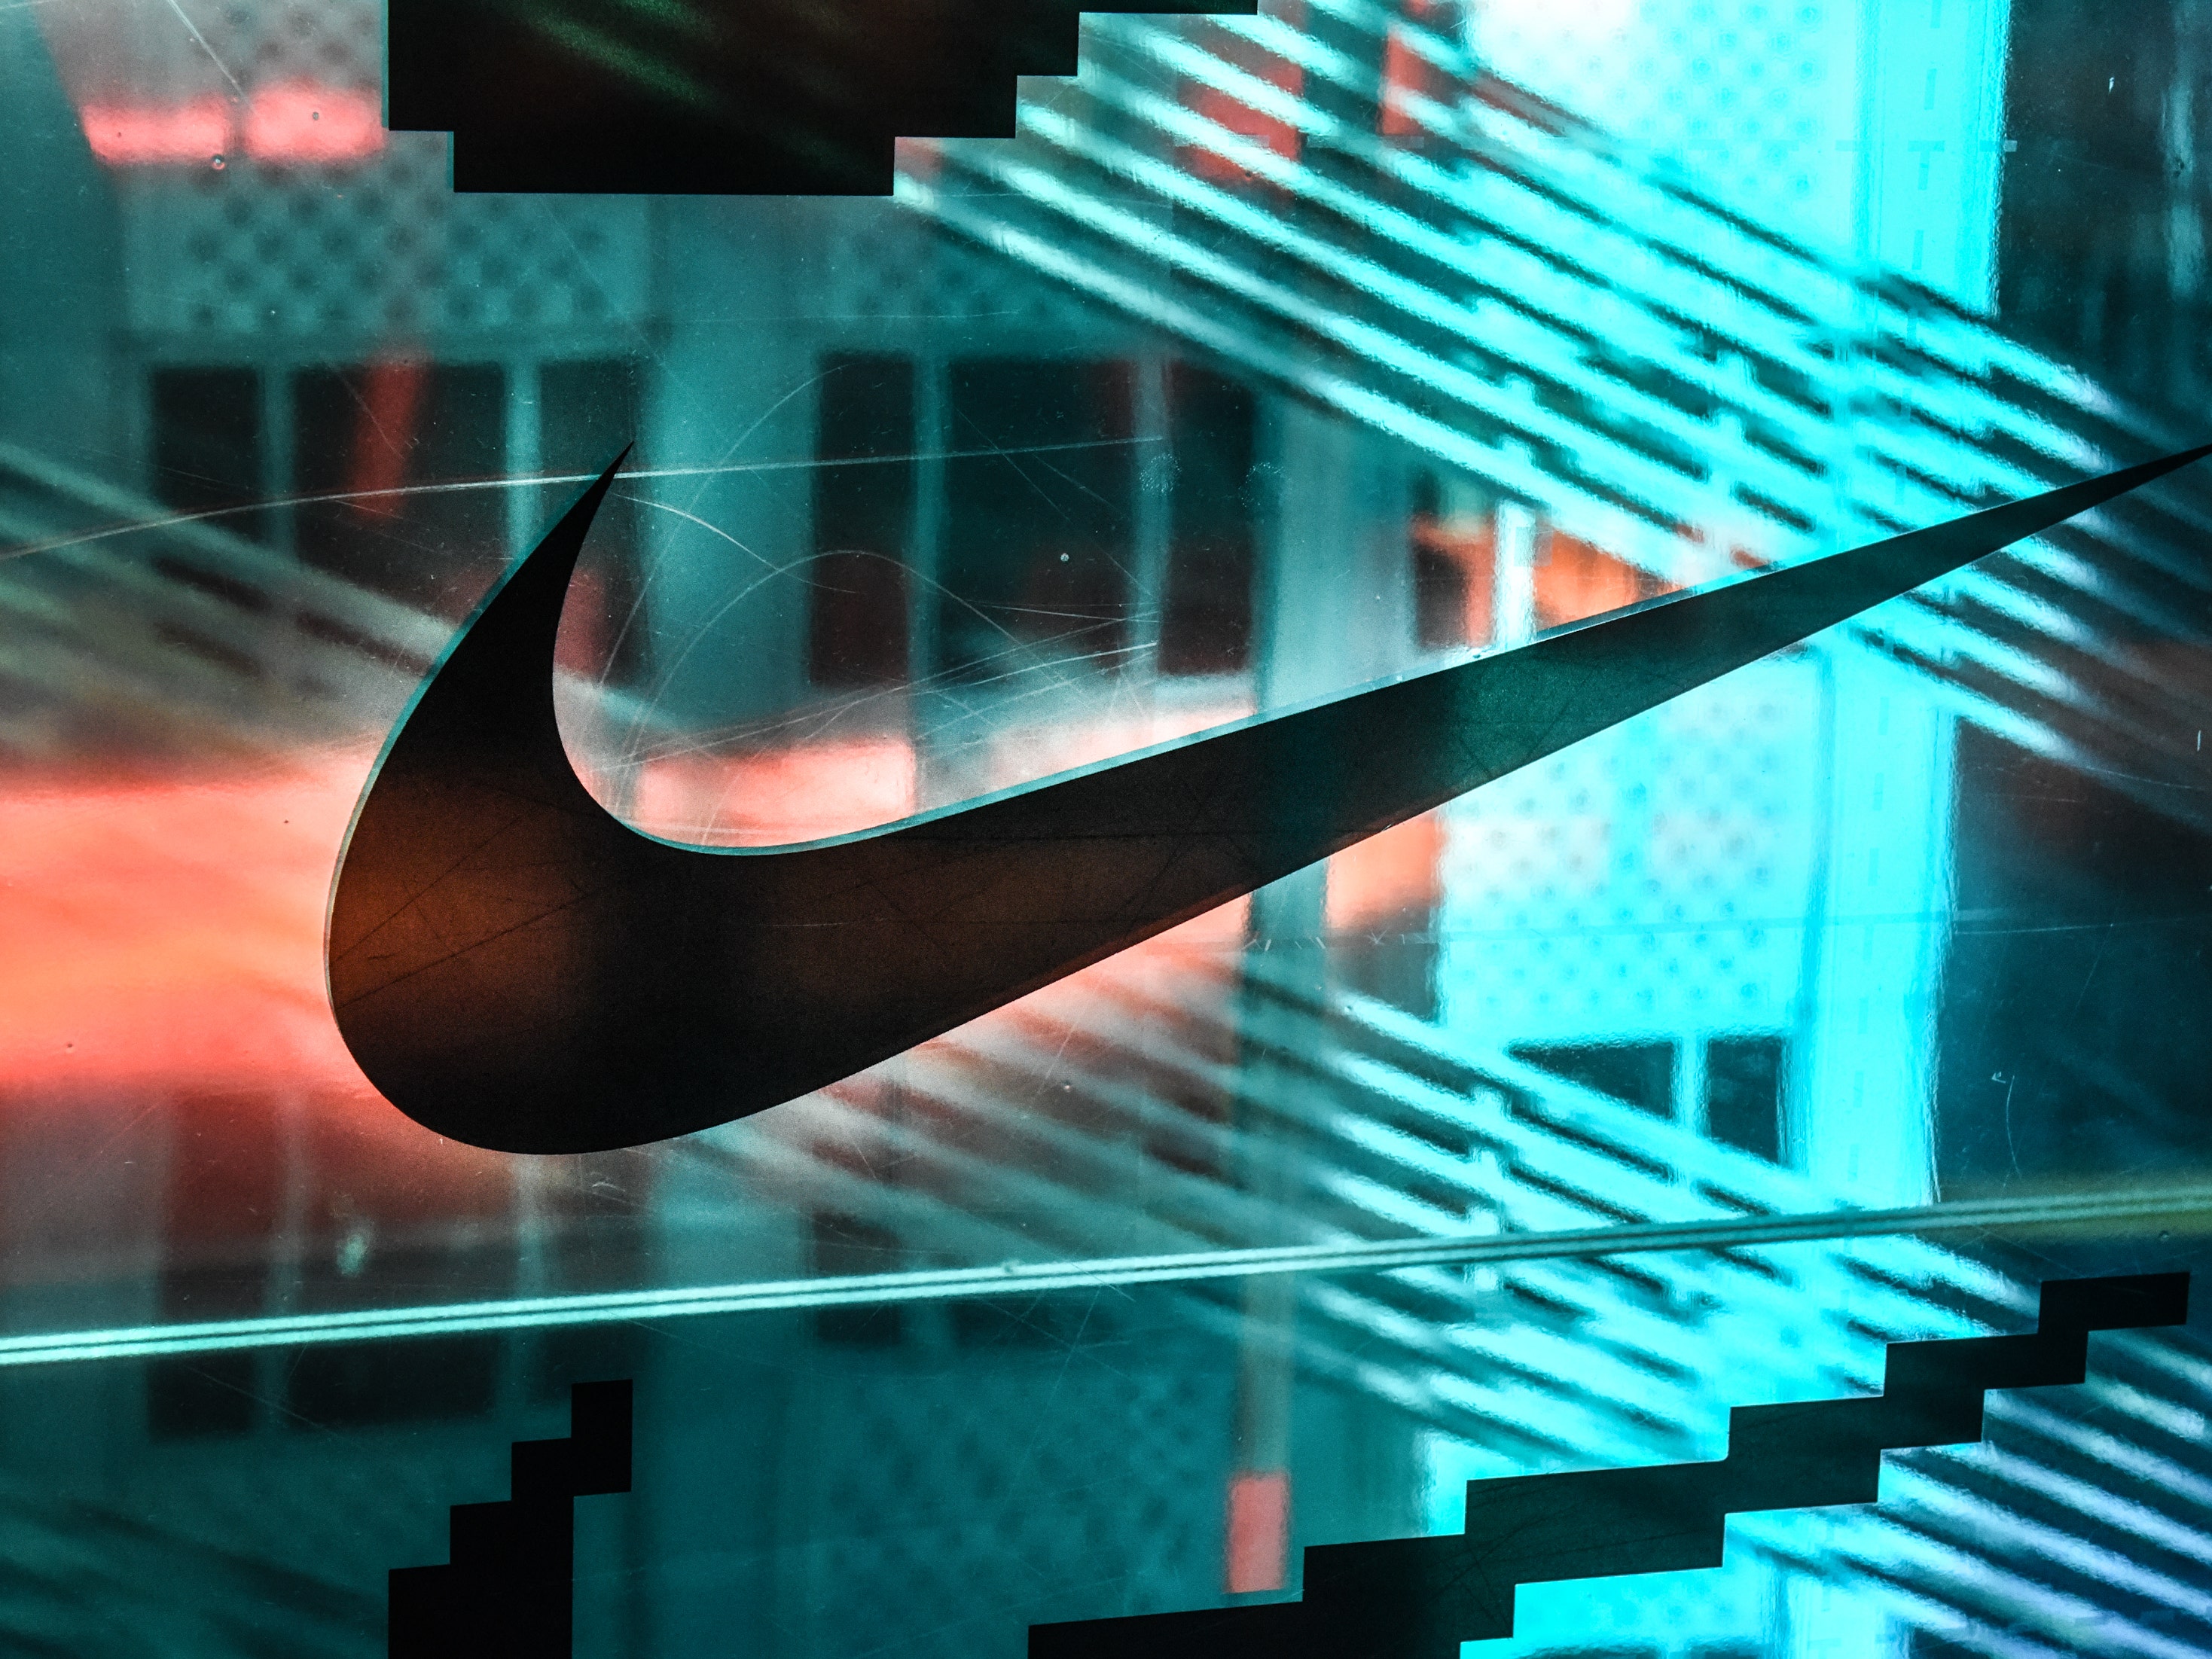 Cooperativa Bóveda estoy de acuerdo con Nike: Stock Strategically Positioned As A Pandemic Recovery Play (NYSE:NKE)  | Seeking Alpha